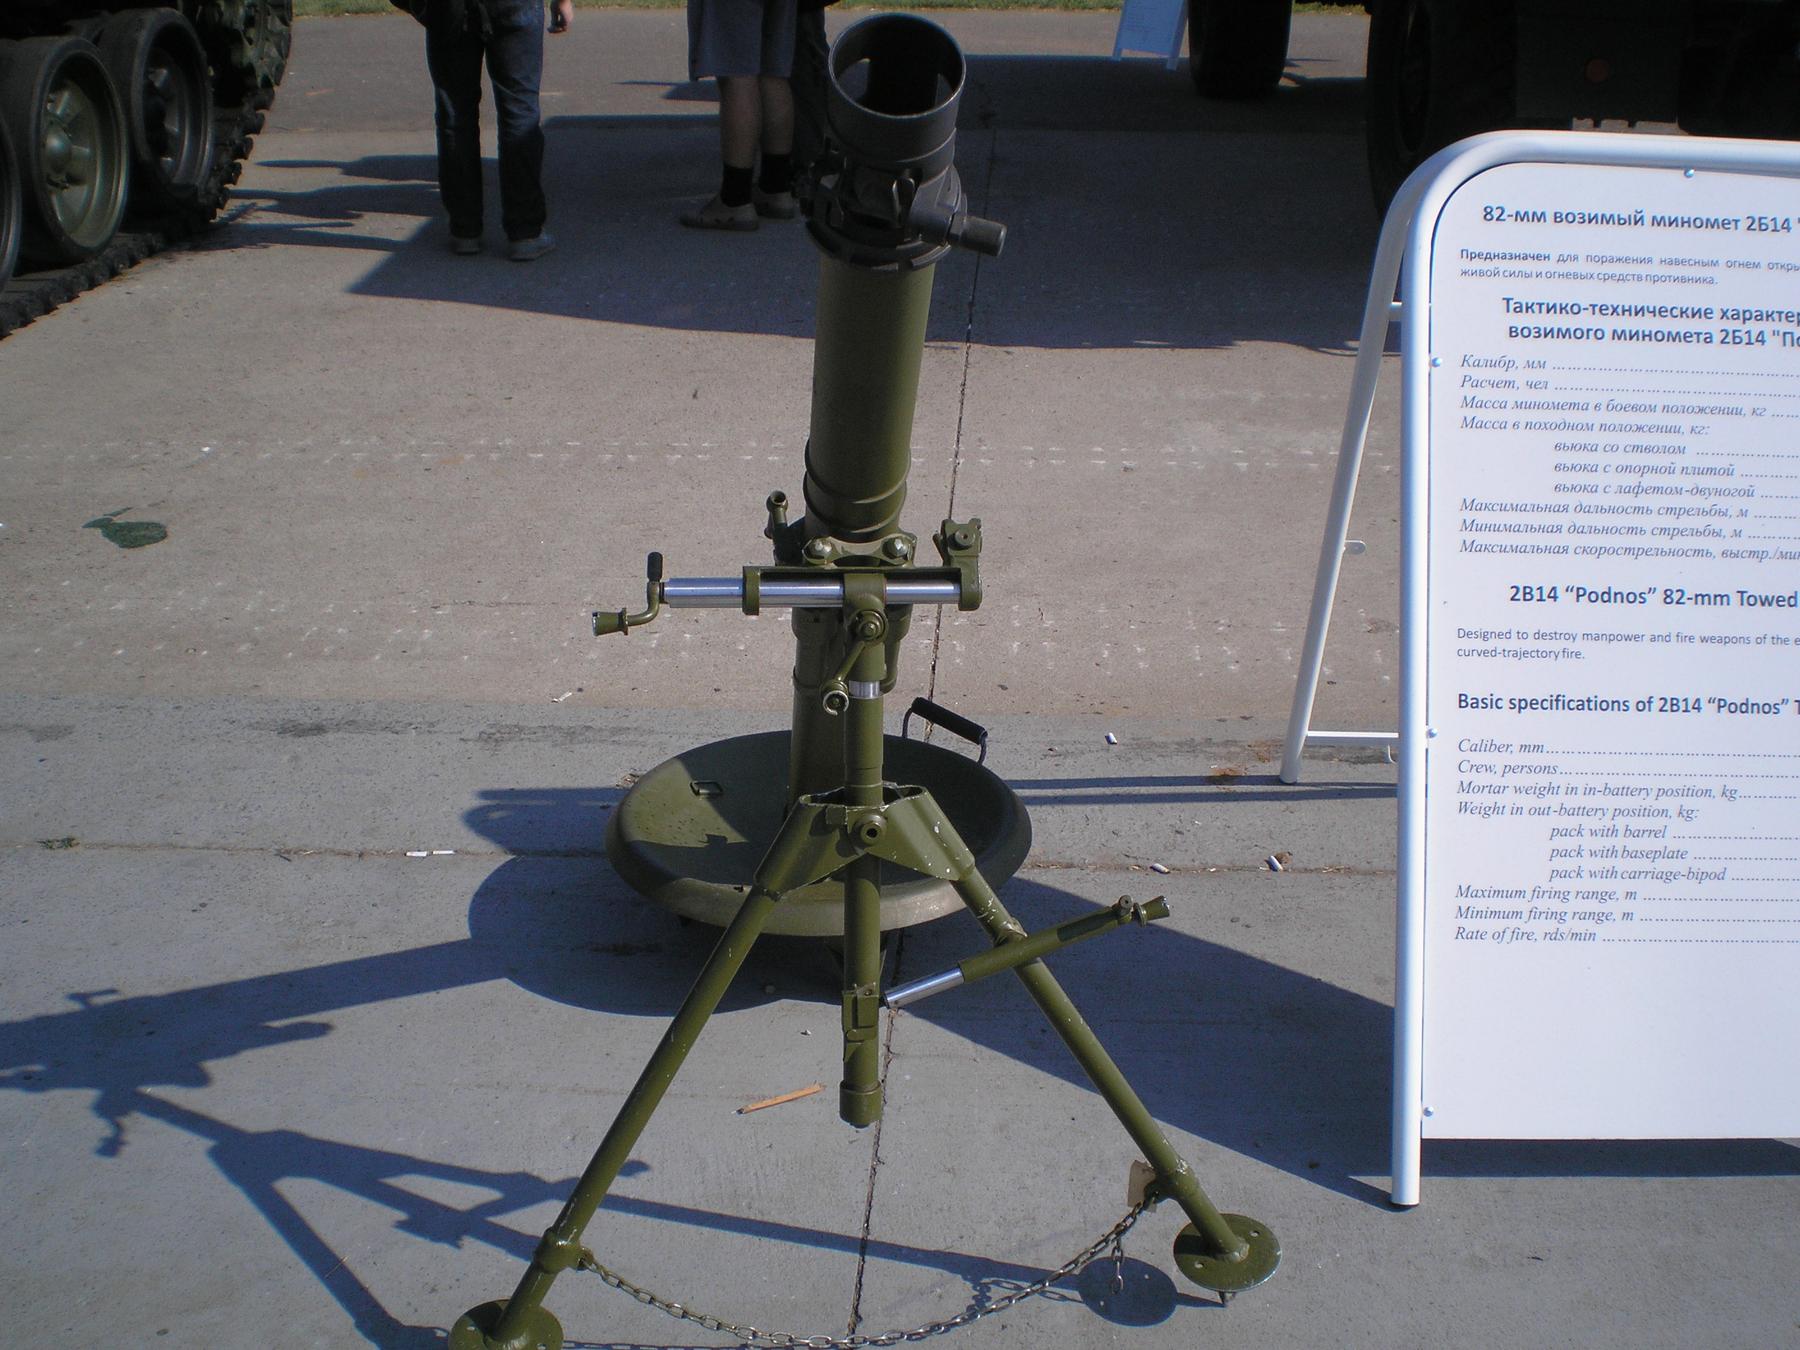 File:2B14 Podnos at 'Engineering Technologies 2010' forum.jpg - Image of Technology, An image of a c